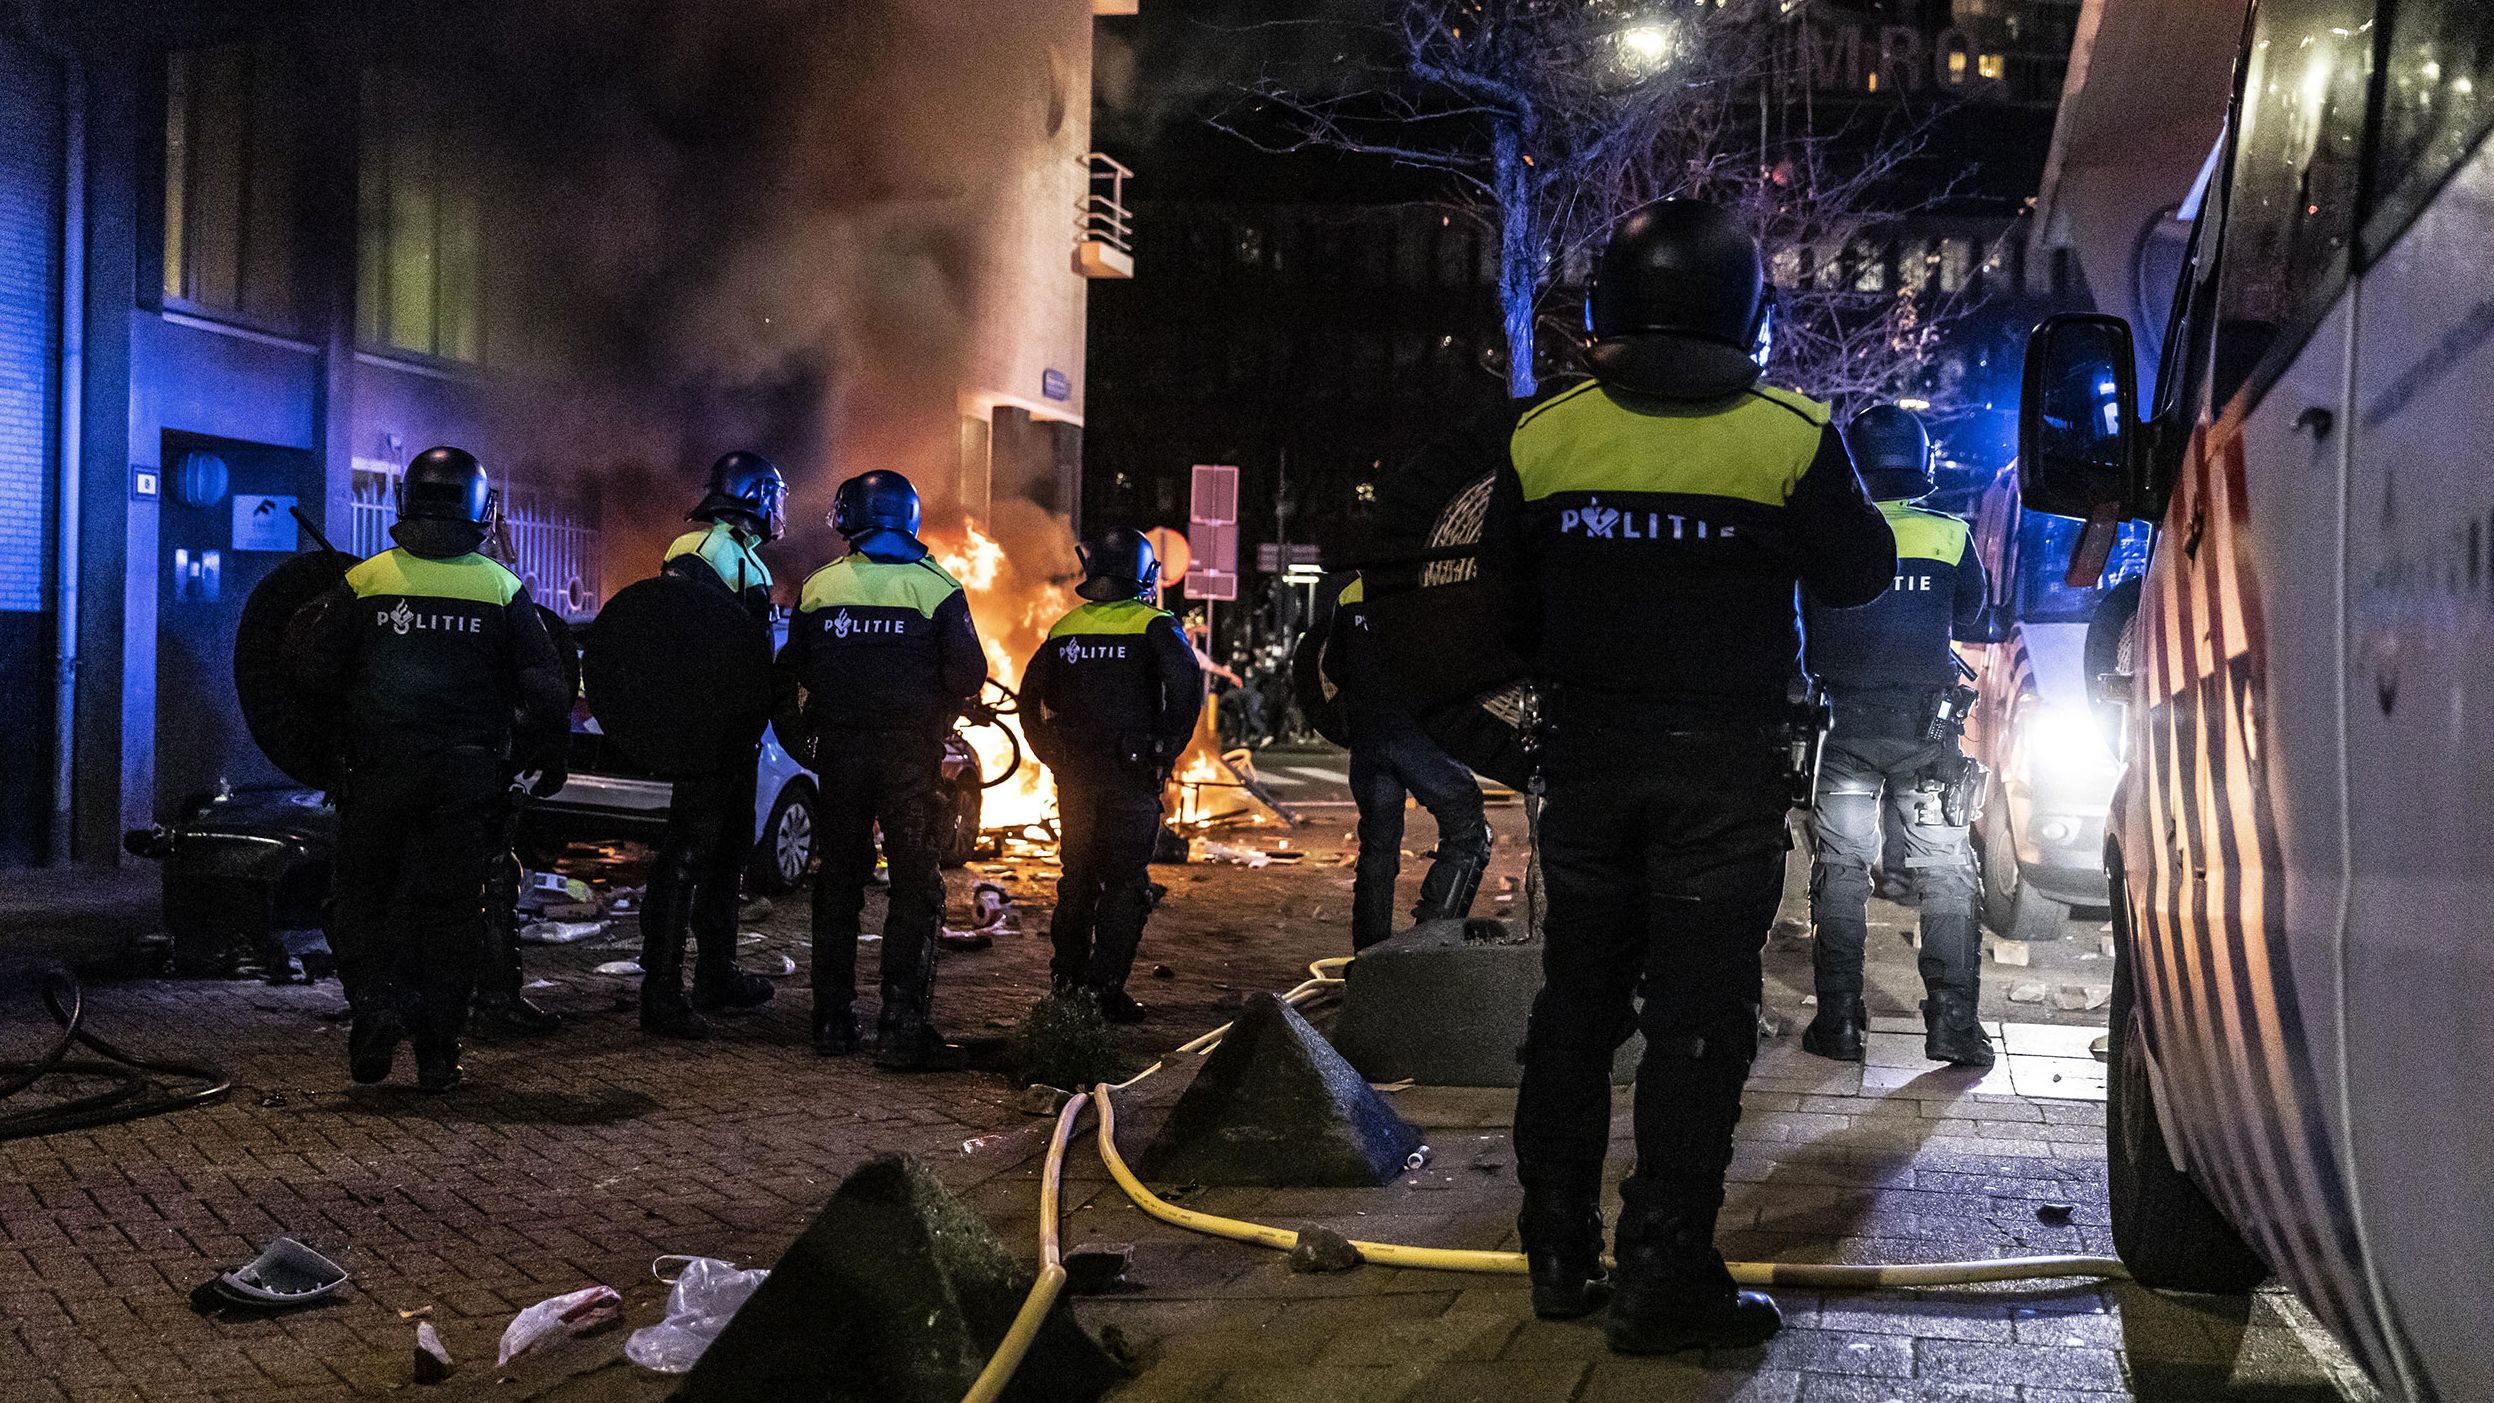 Police work at the scene of protests in Rotterdam on Friday.